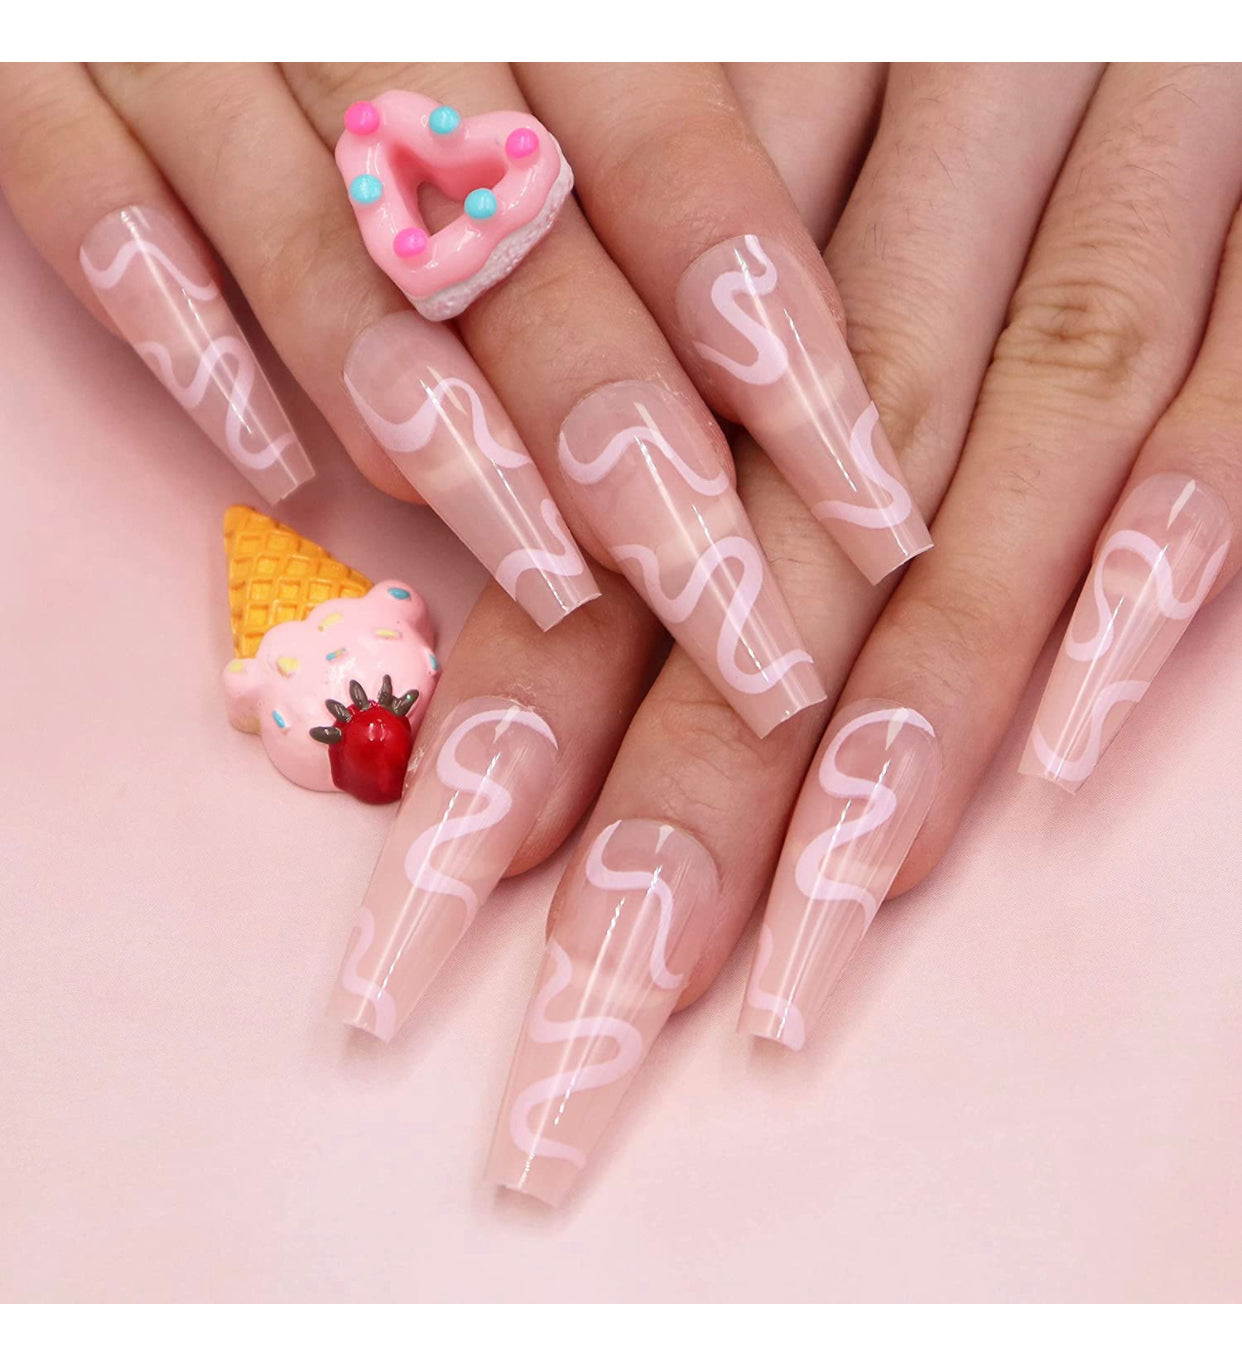 TRANSPARENT JELLY NAILS WITH PINK LINES SWIRLS COFFIN SHAPE LONG